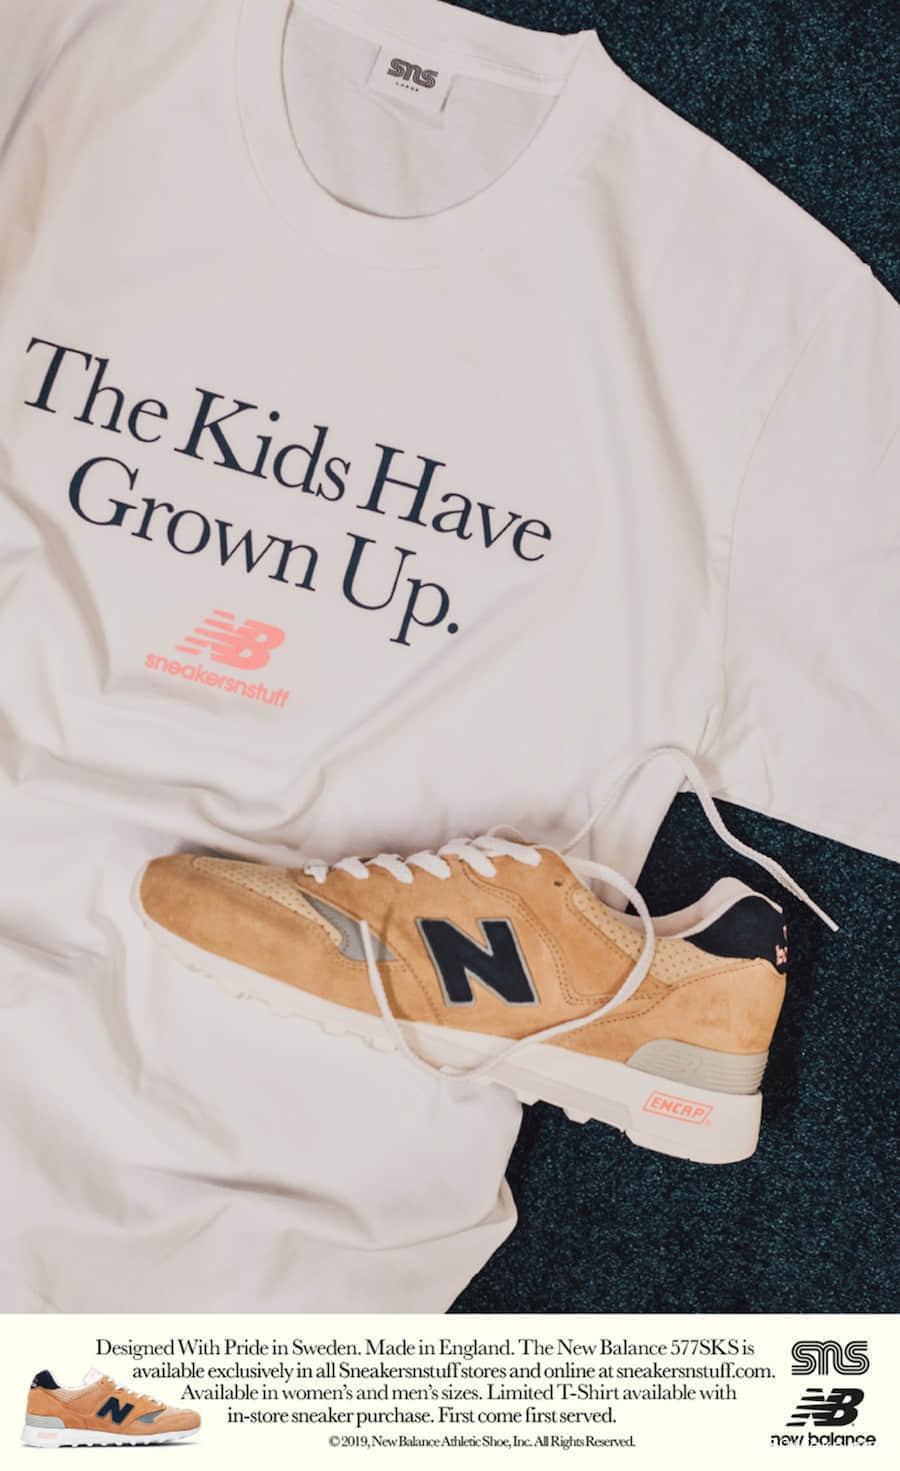 New Balance x Sneakersnstuff 577 'Grown Up' M577SKS - Limited Edition